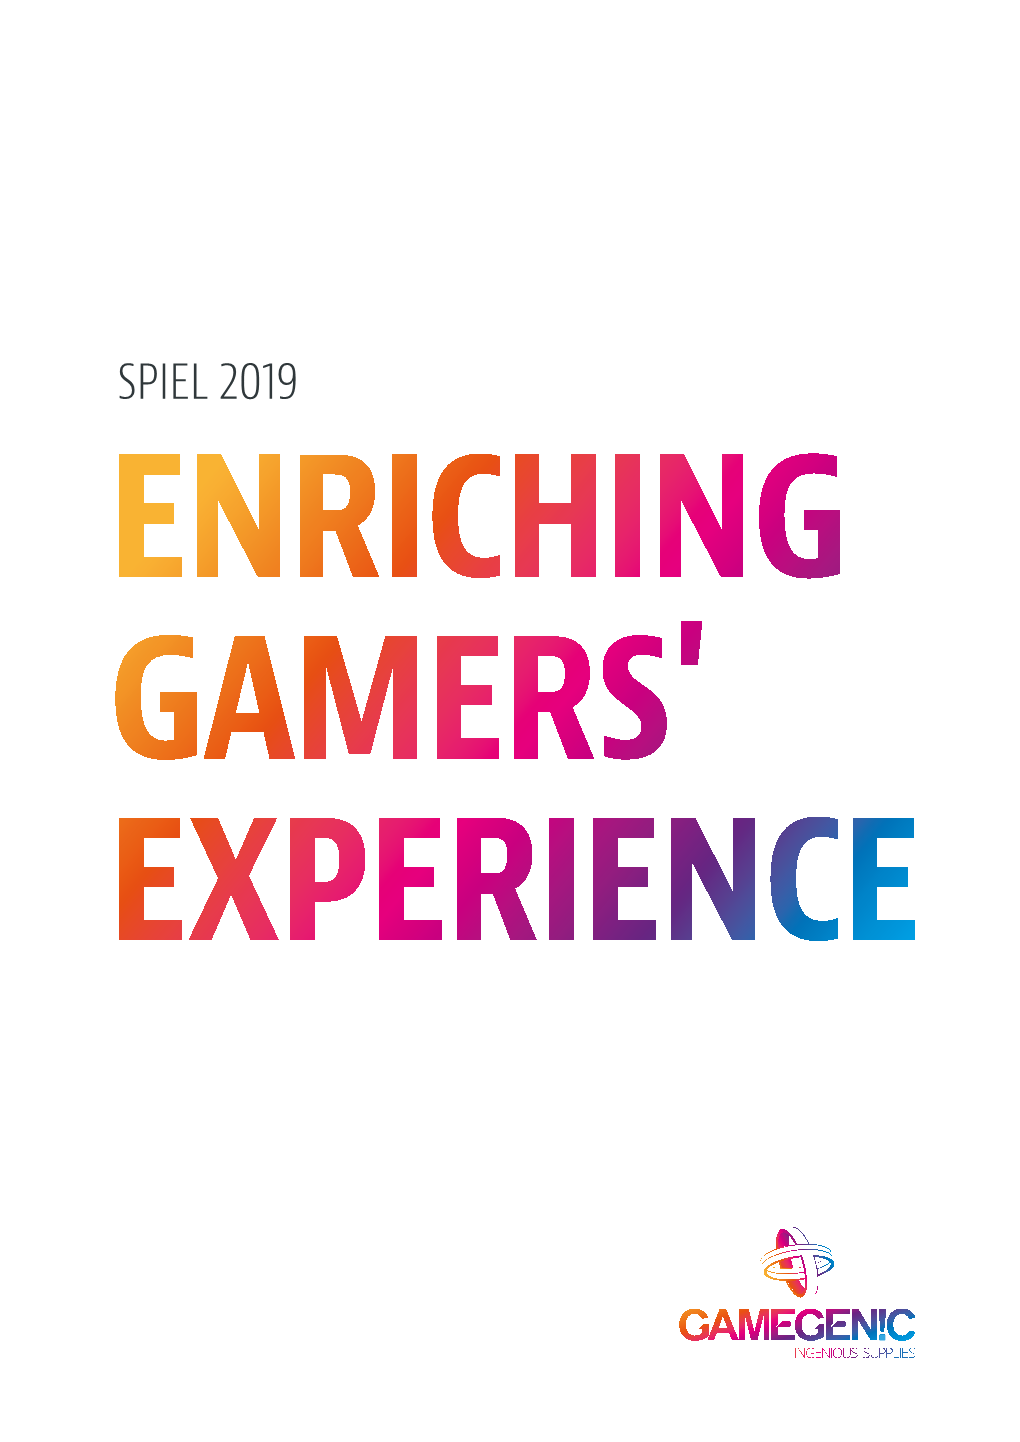 SPIEL 2019 ENRICHING GAMERS' EXPERIENCE INGENIOUS SUPPLIES Great Games Deserve Amazing Supplies to Protect Them and Enhance Your Gaming Experience